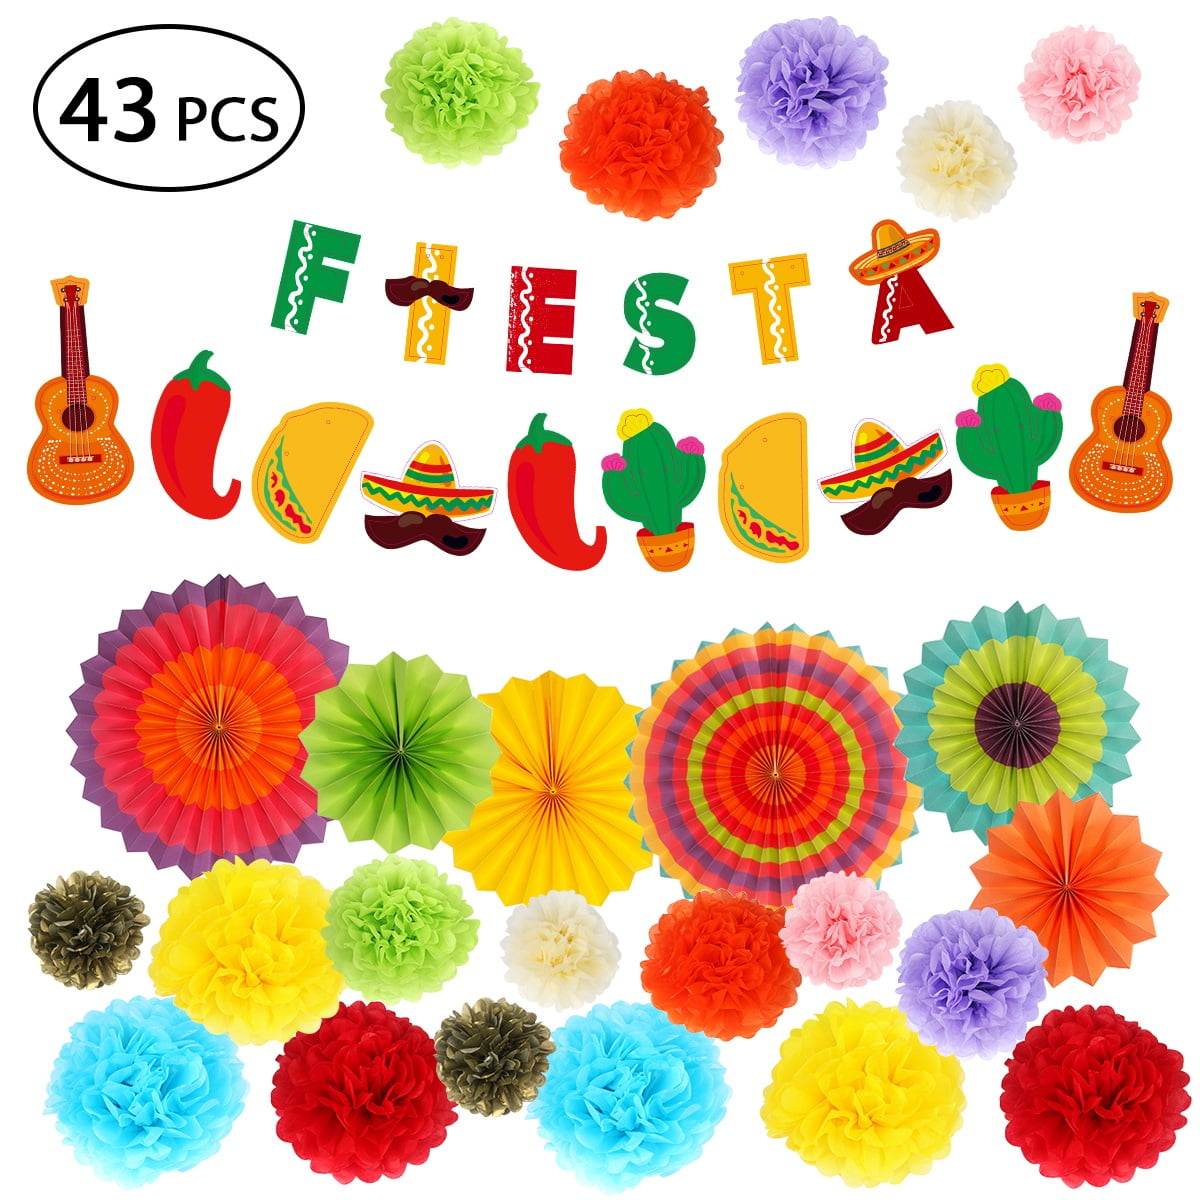 Final Fiesta Bachelorette Party Decorations- Cinco De Mayo Party Supplies- Fiesta Banner Cactus Pattern Garland Flag For Baby Shower Bridal Wedding  Engagement Mexican Party Decoration Banner – BOSTON CREATIVE COMPANY